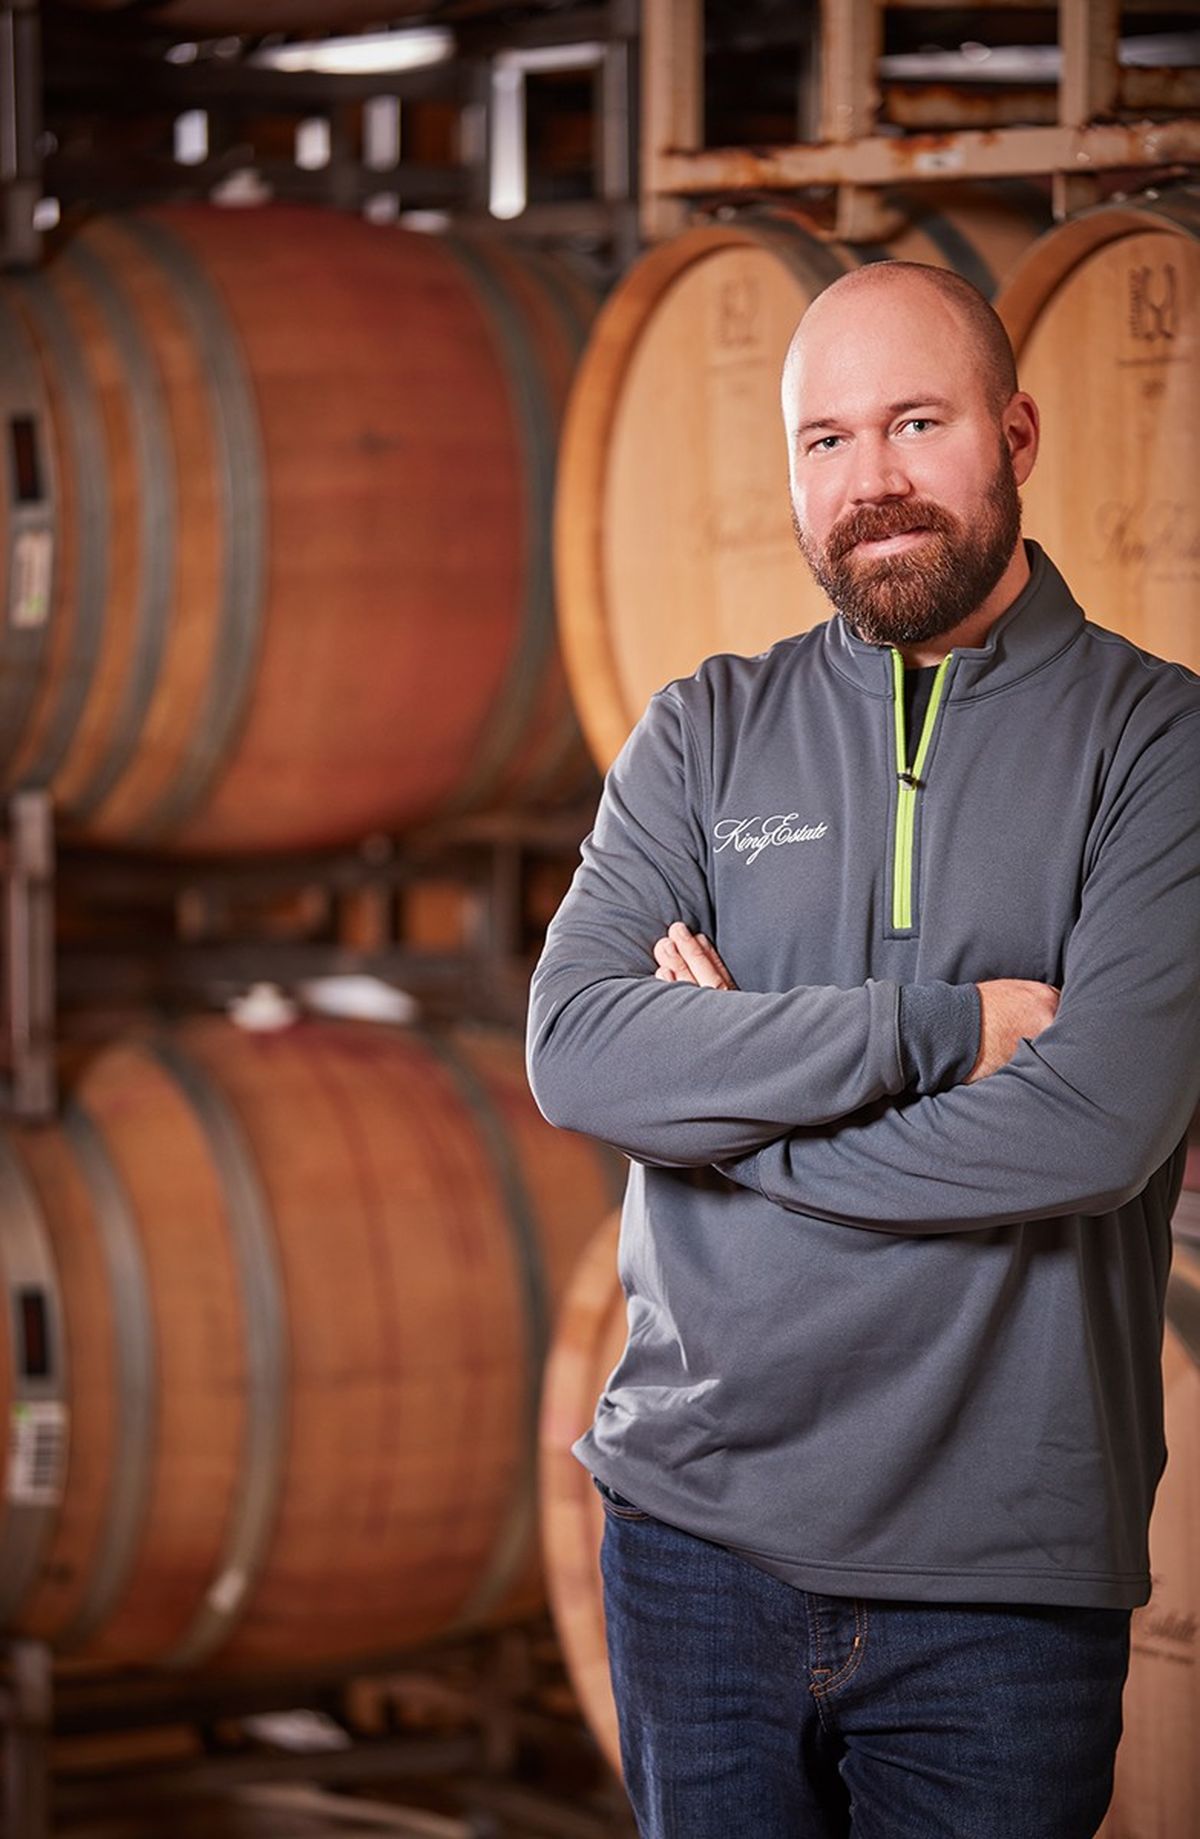 Brent Stone, a product of Washington State University’s winemaking program, was named head winemaker of King Estate Winery near Eugene in 2017. Stone began working for the King family in 2011.  (Sara Sanger/King Estate Winery)